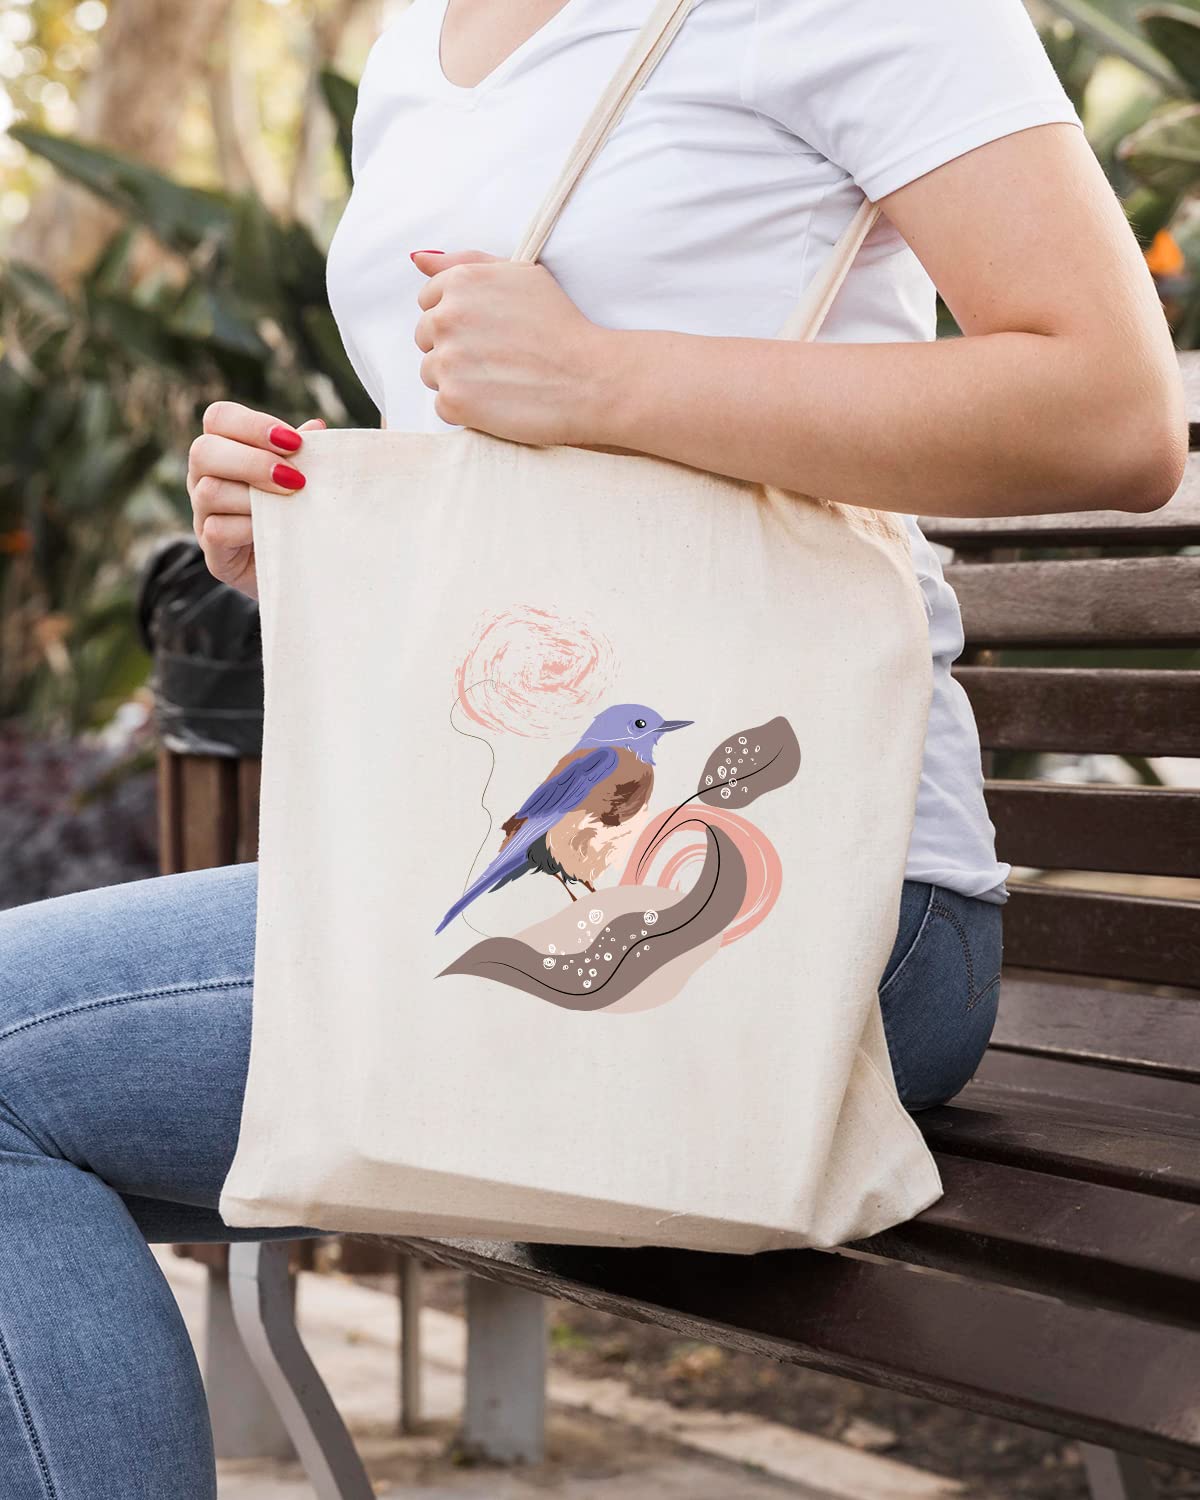 The Pink Magnet Purple Bird Tote Bag - Canvas Tote Bag for Women | Printed Multipurpose Cotton Bags | Cute Hand Bag for Girls | Best for College, Travel, Grocery | Reusable Shopping Bag | Eco-Friendly Tote Bag